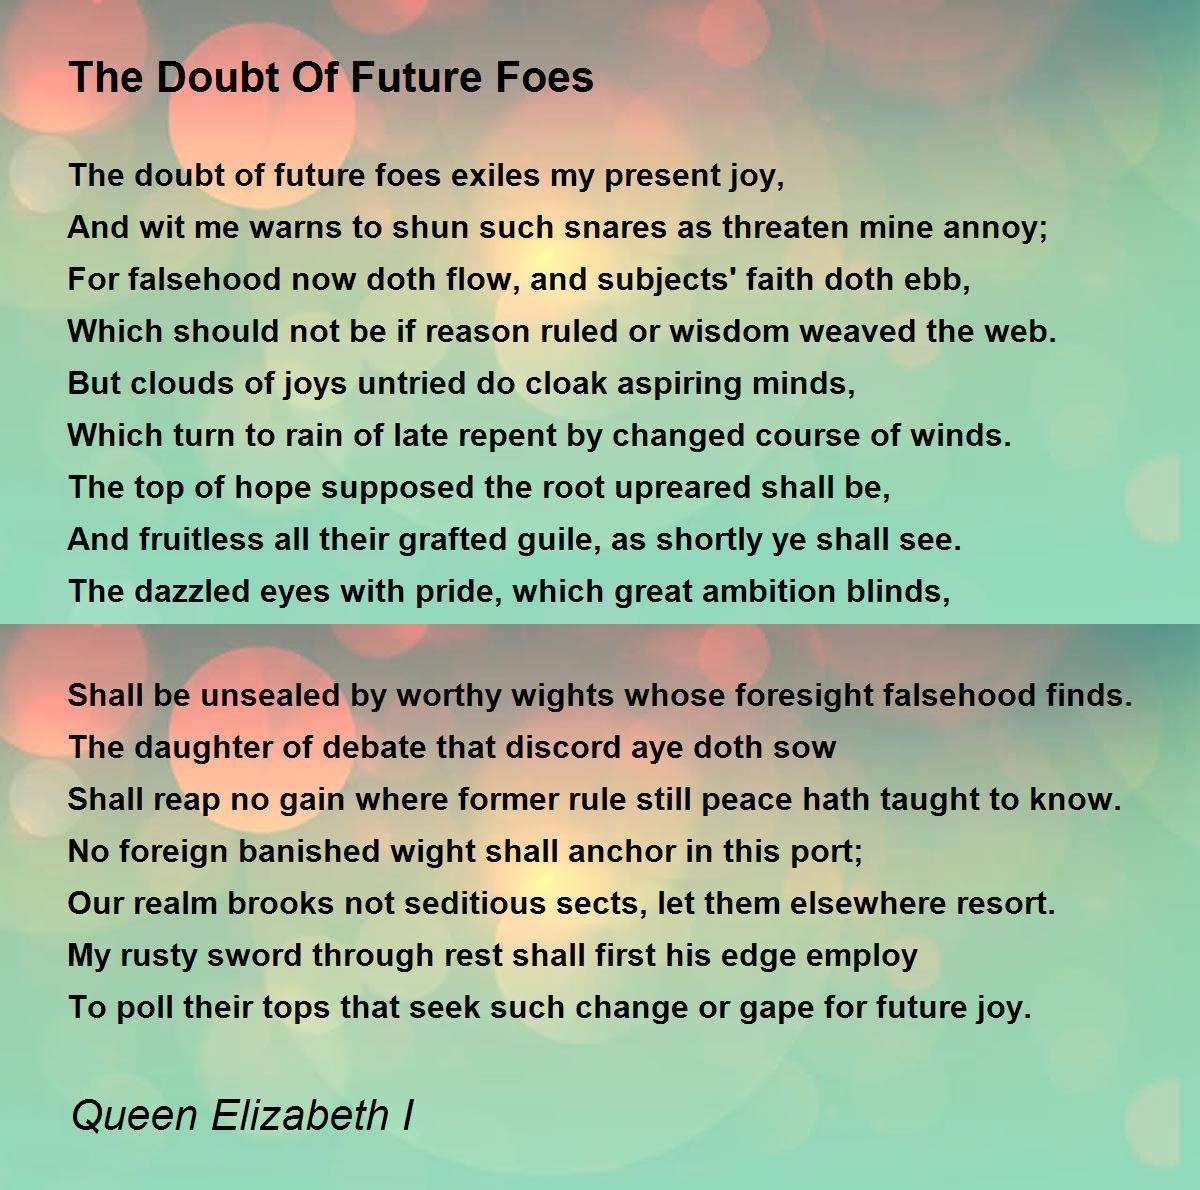 The Doubt of Future Foes by Queen